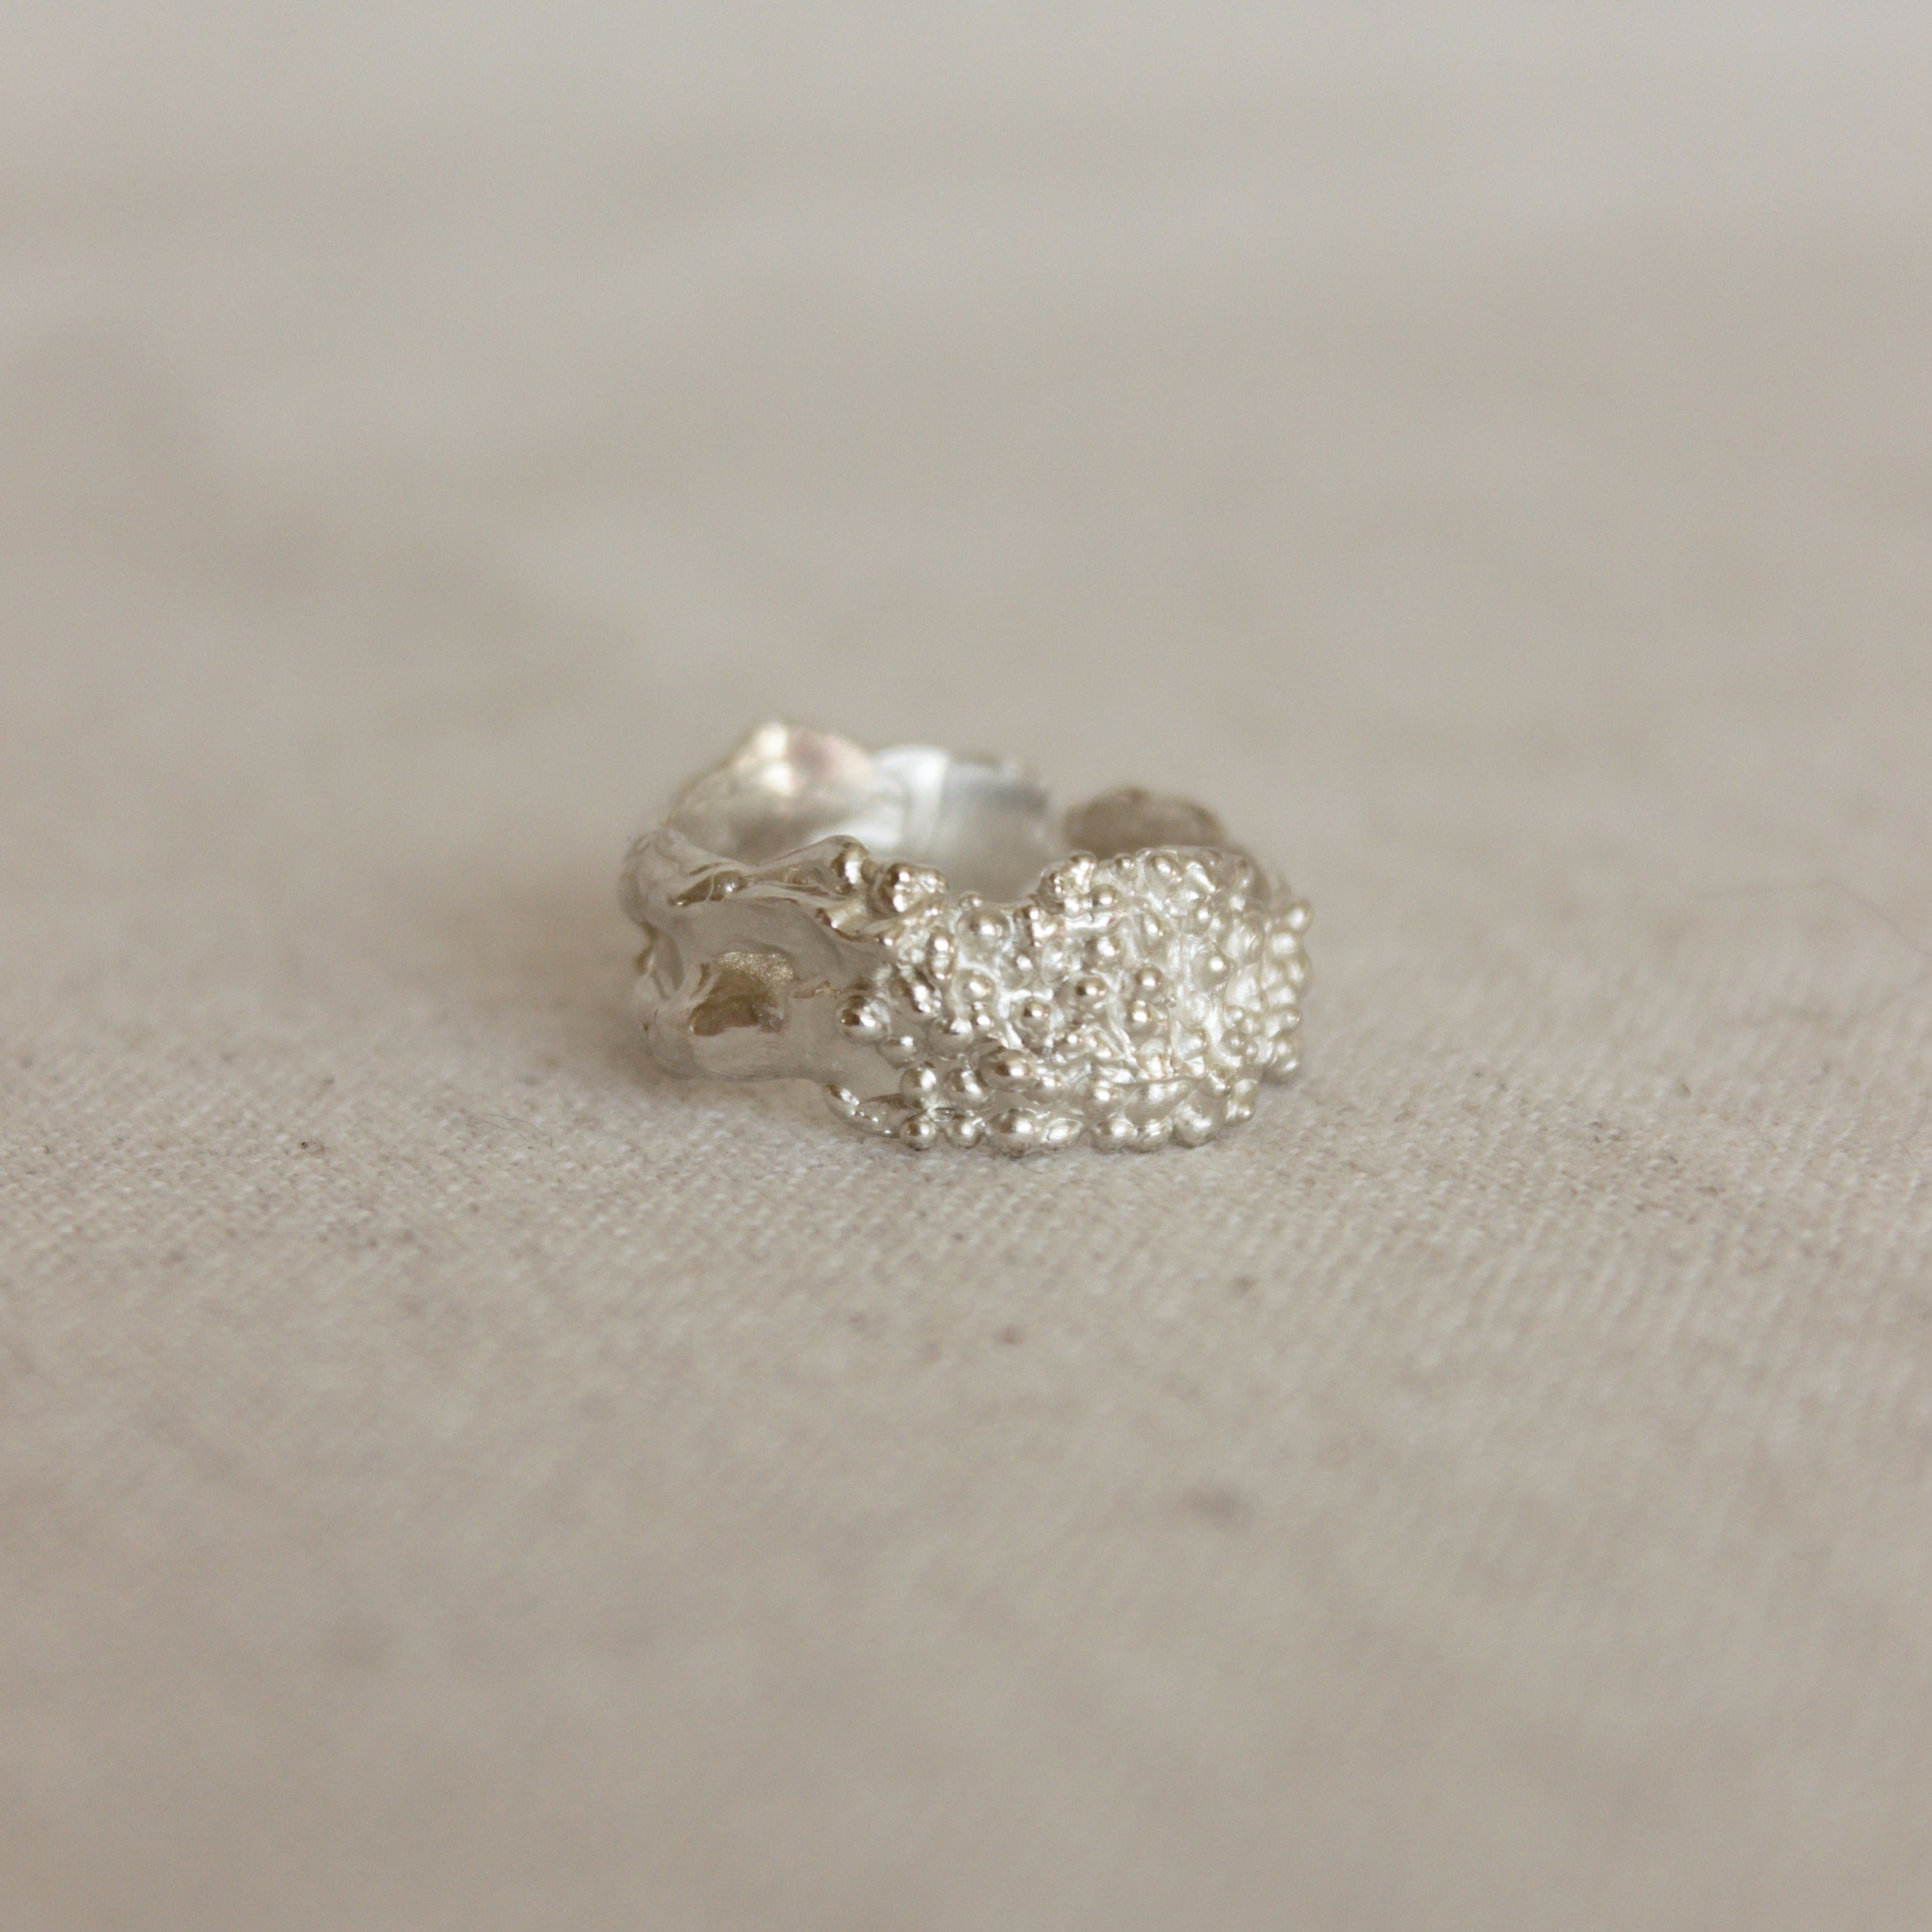 Suki is a Japanese word that means fondness, or love for something. The Suki ring features a gorgeous combination of textures that reflects the light beautifully and acts as a gentle reminder to treat yourself with love and patience, just like you would a friend.